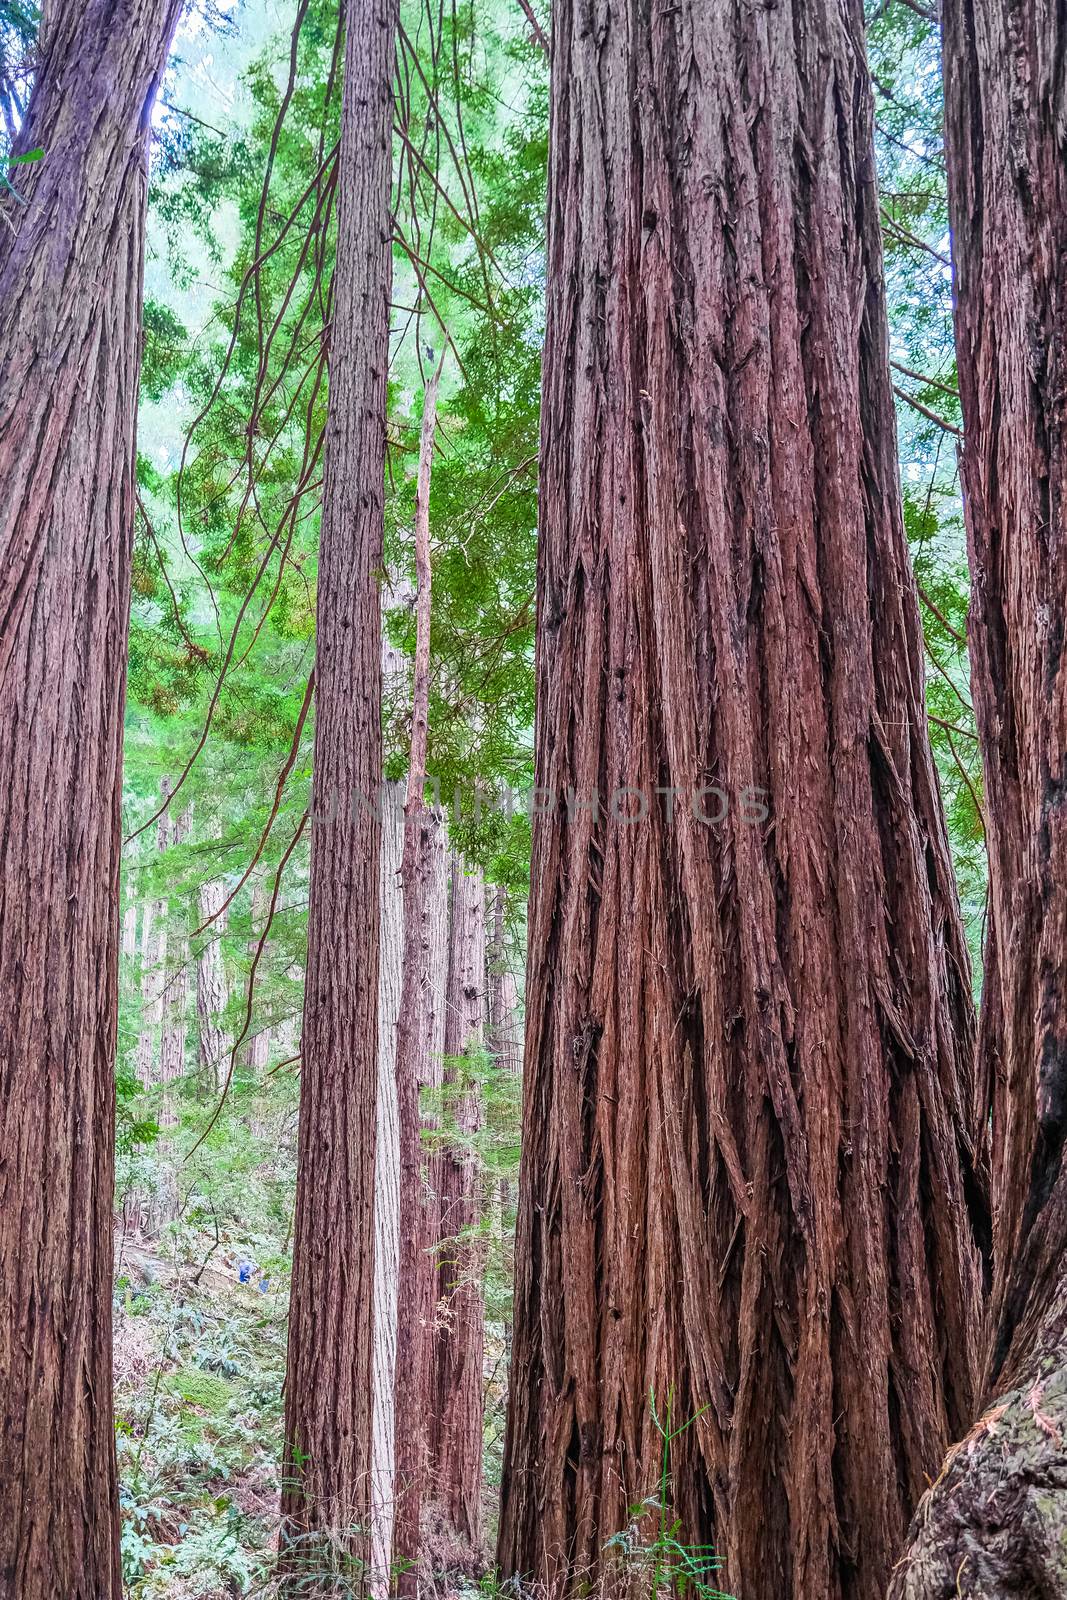 Redwoods Rising High into the Sky in Muir Woods